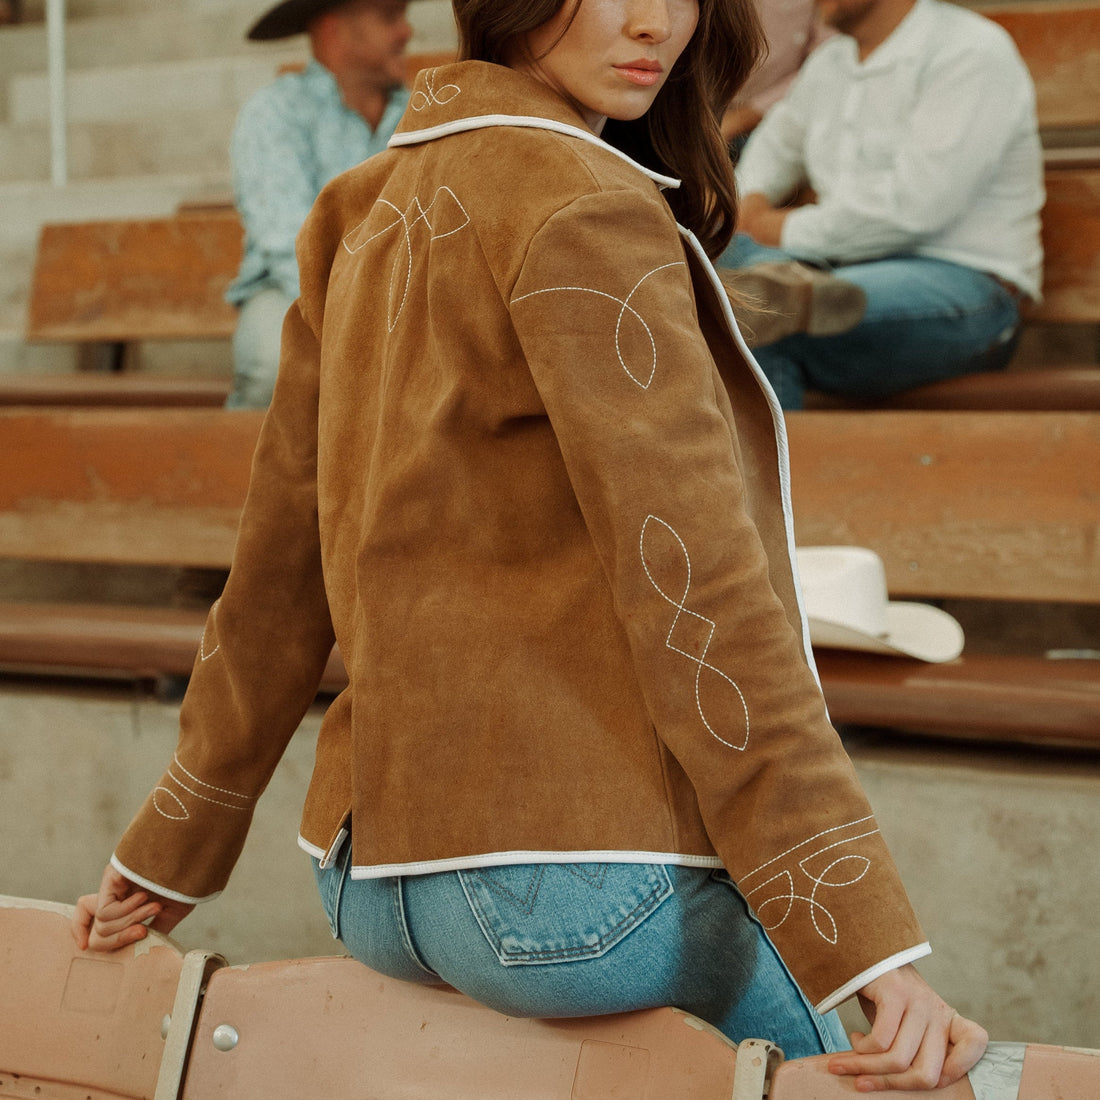 Western & Co. - Rodeo Ready Blazer - Suede Leather Blazer  Western outfits  women, Cowgirl style outfits, Cowboy outfits for women